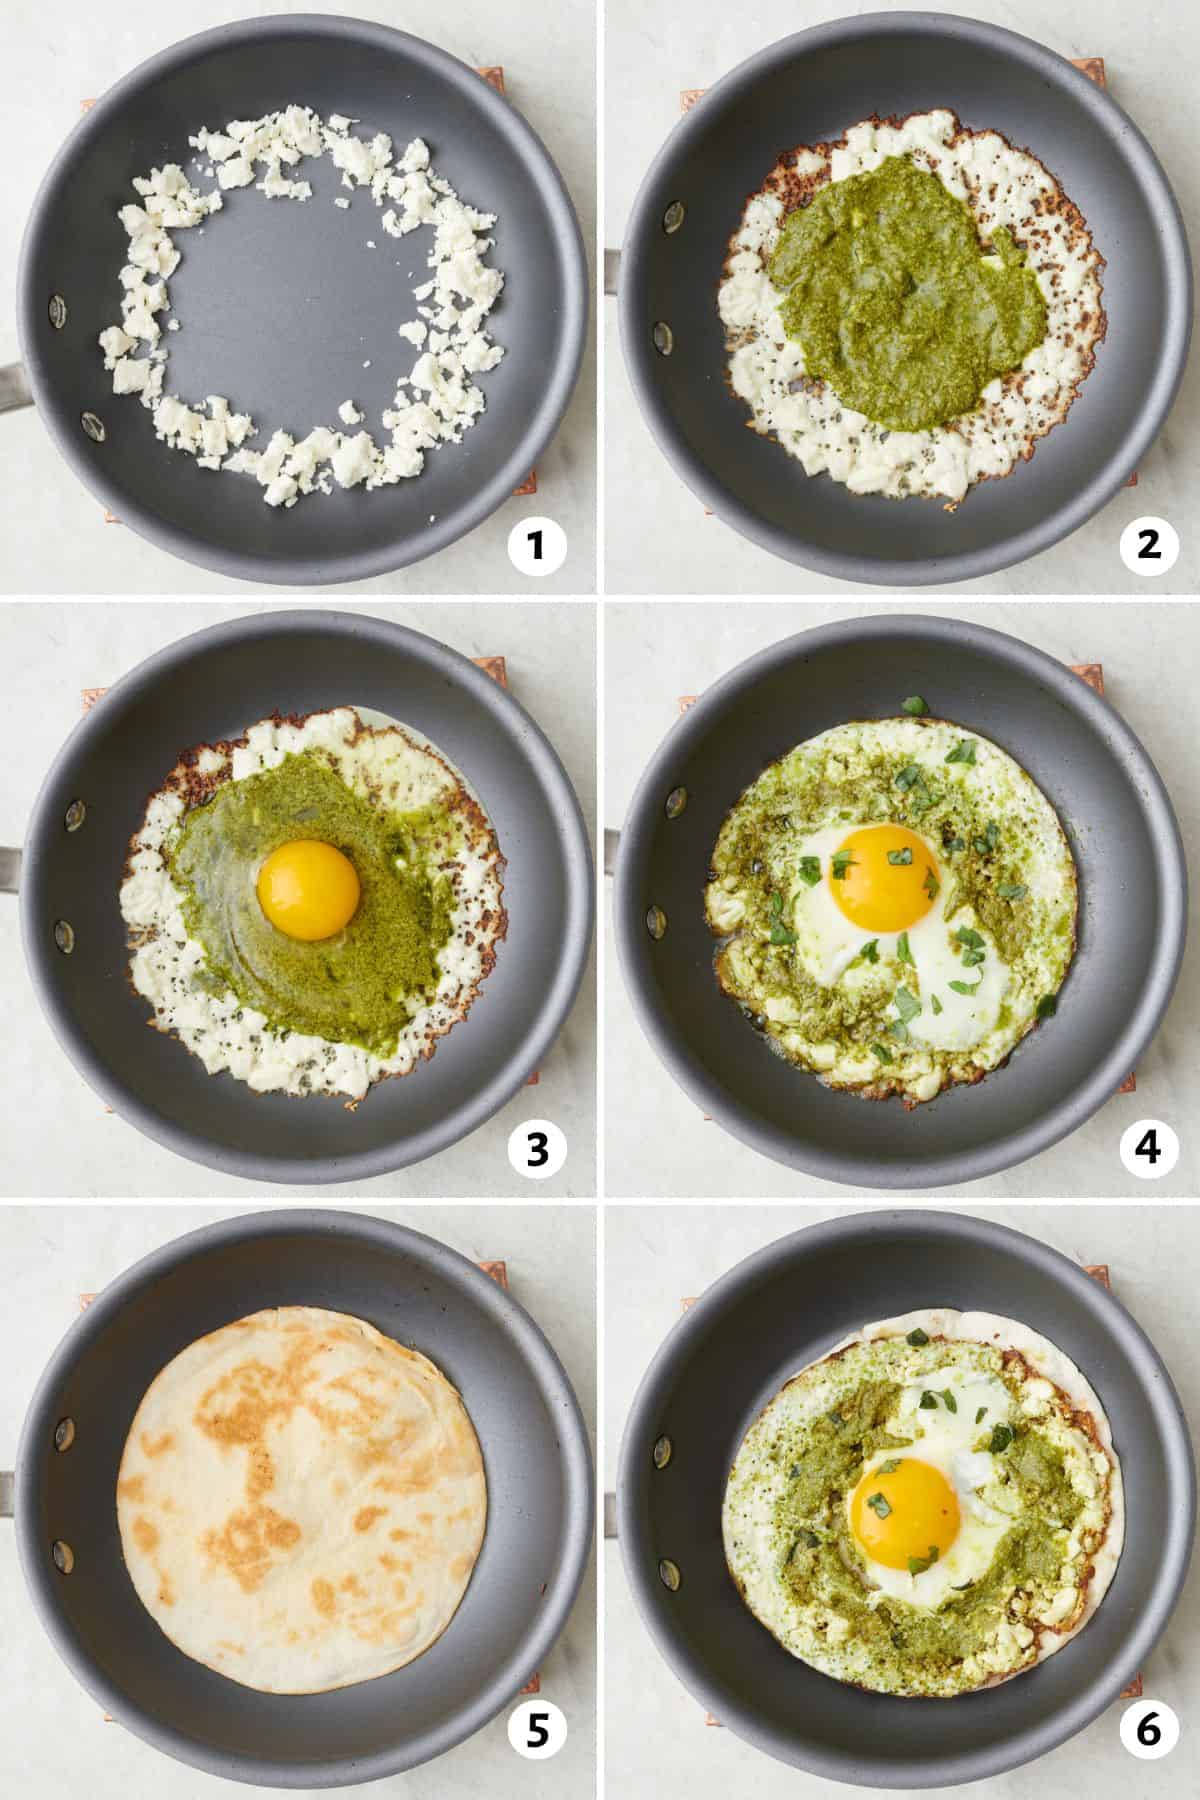 6 image collage making recipe: 1- crumbled feta on the outside of pan, 2- pesto added to the center, 2- after feta is slightly crisped with an egg added on top, 5- after the egg has cooked, feta egg removed and a tortilla shell added, 6- cook pesto feta egg added on top of tortilla.